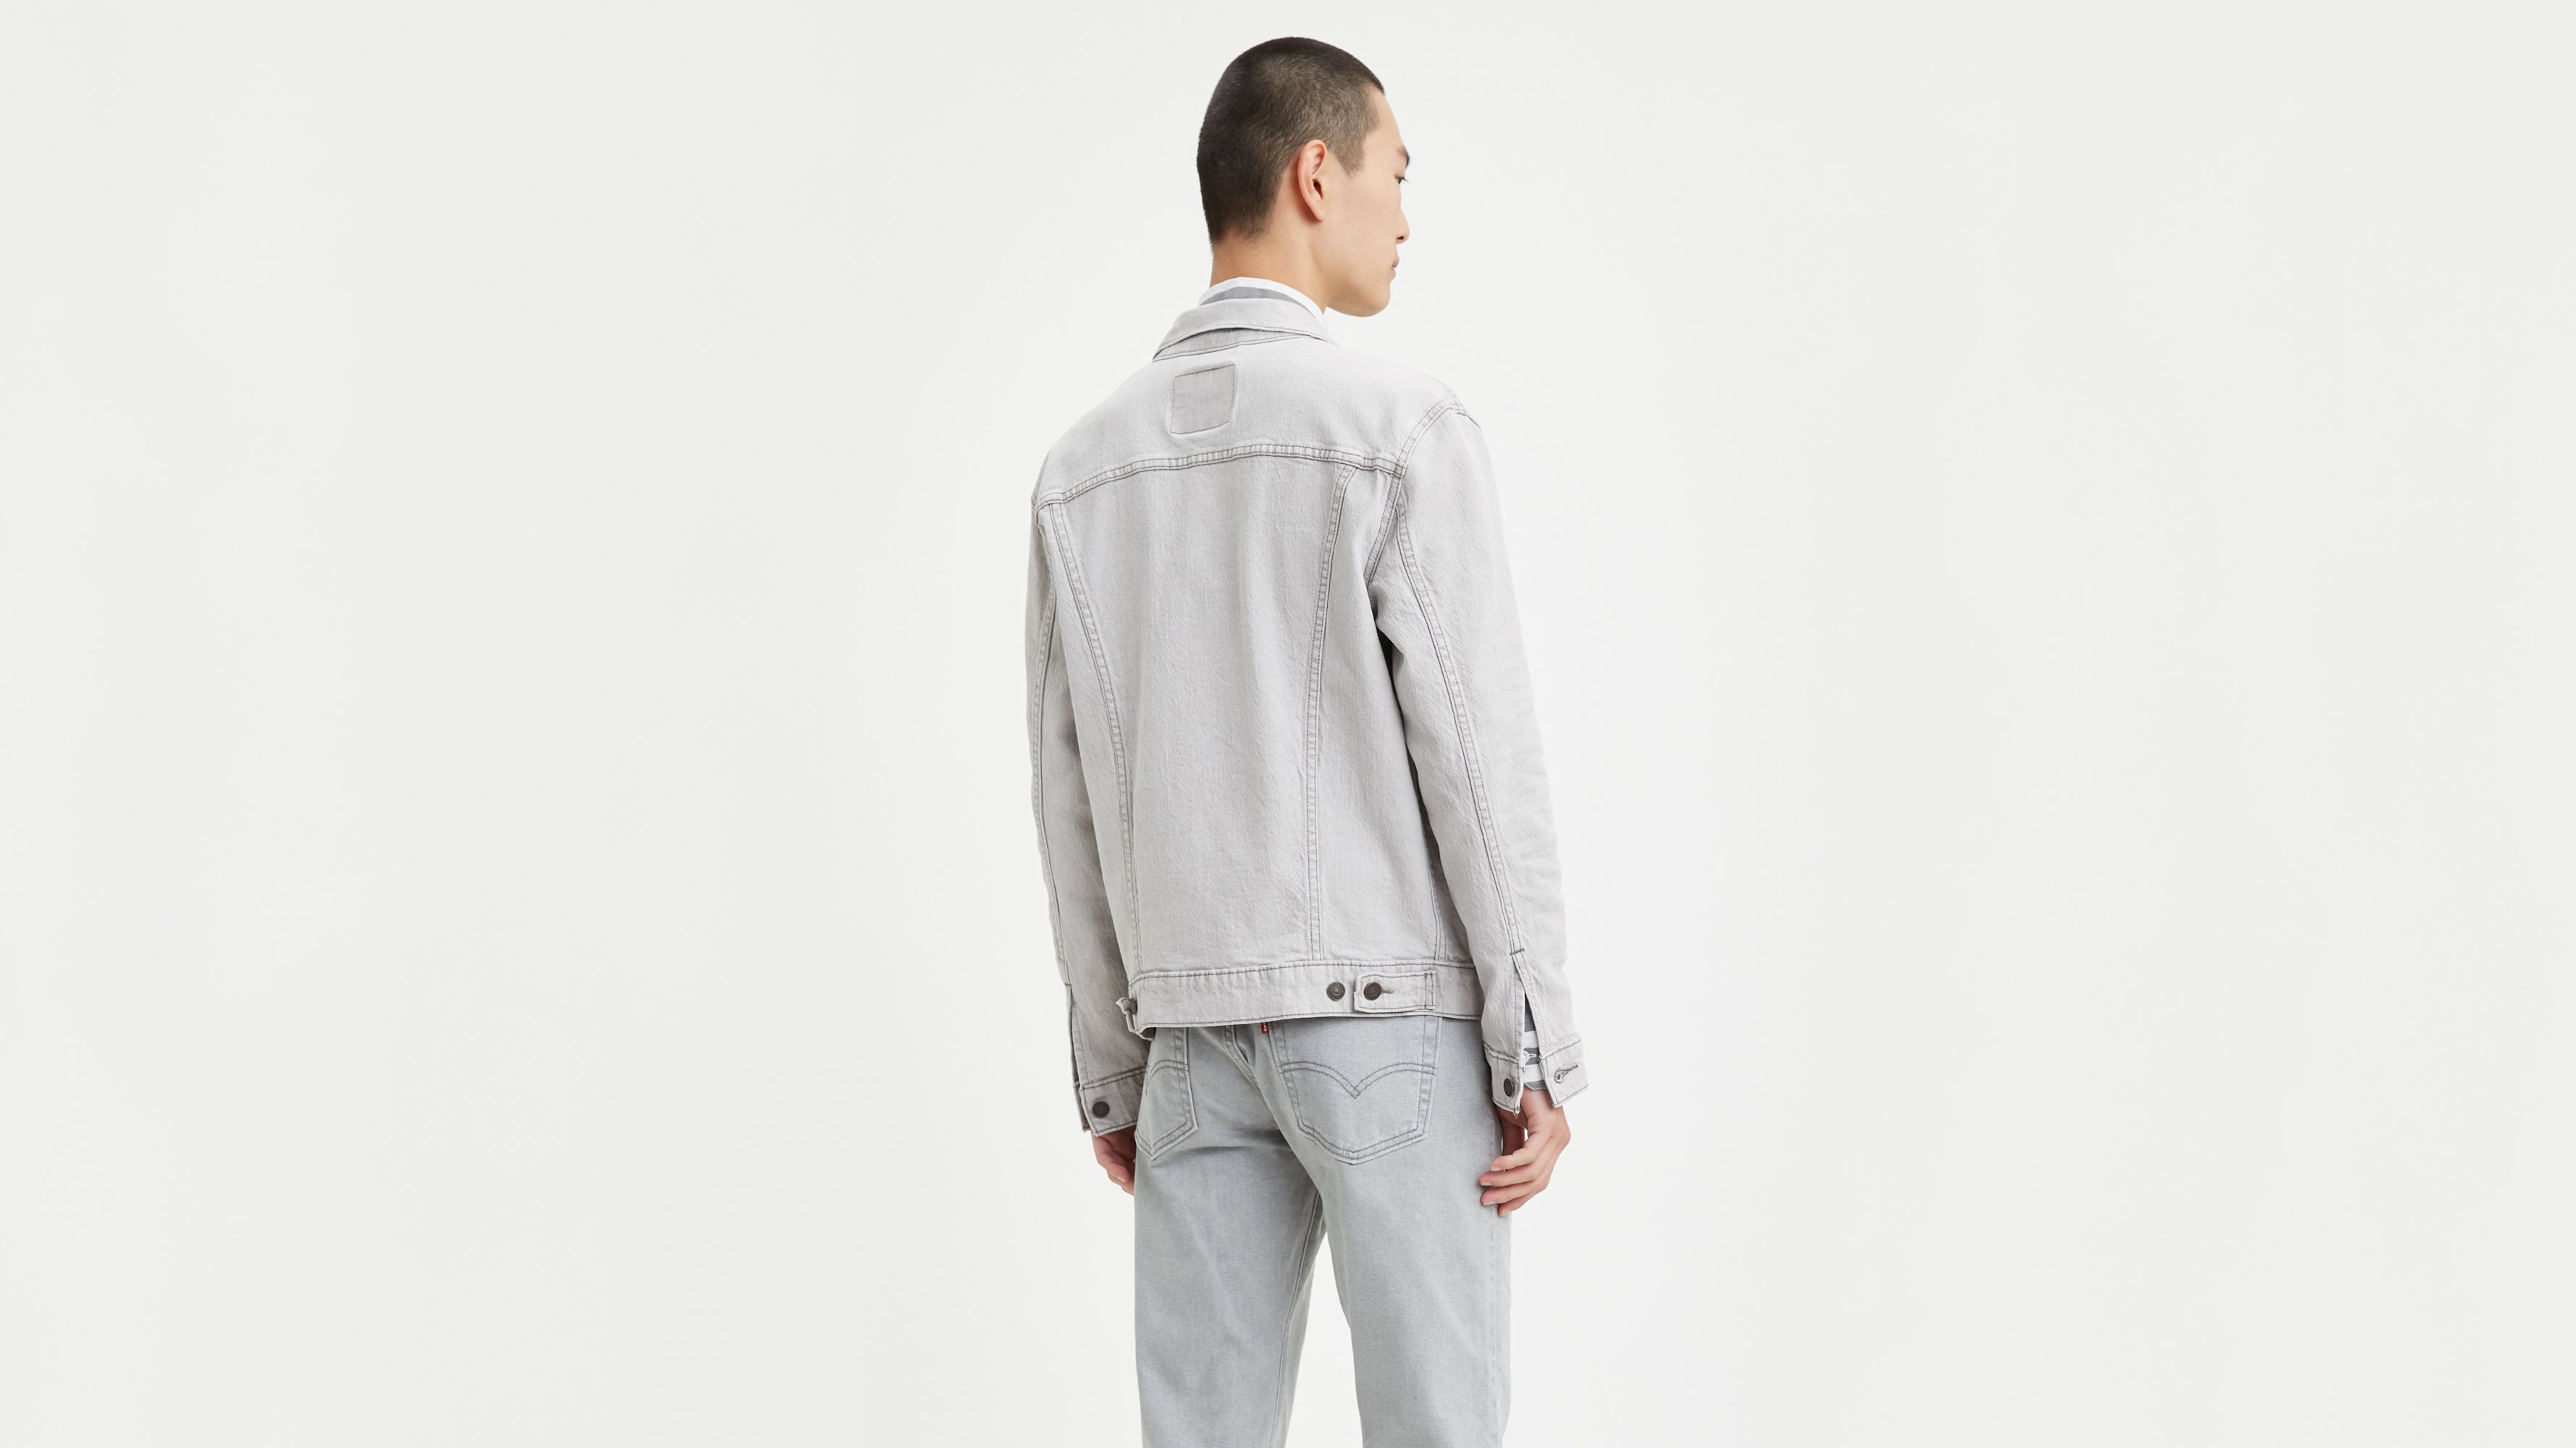 Grey Jeans And Denim Jacket Hot Sale - tundraecology.hi.is 1703778864